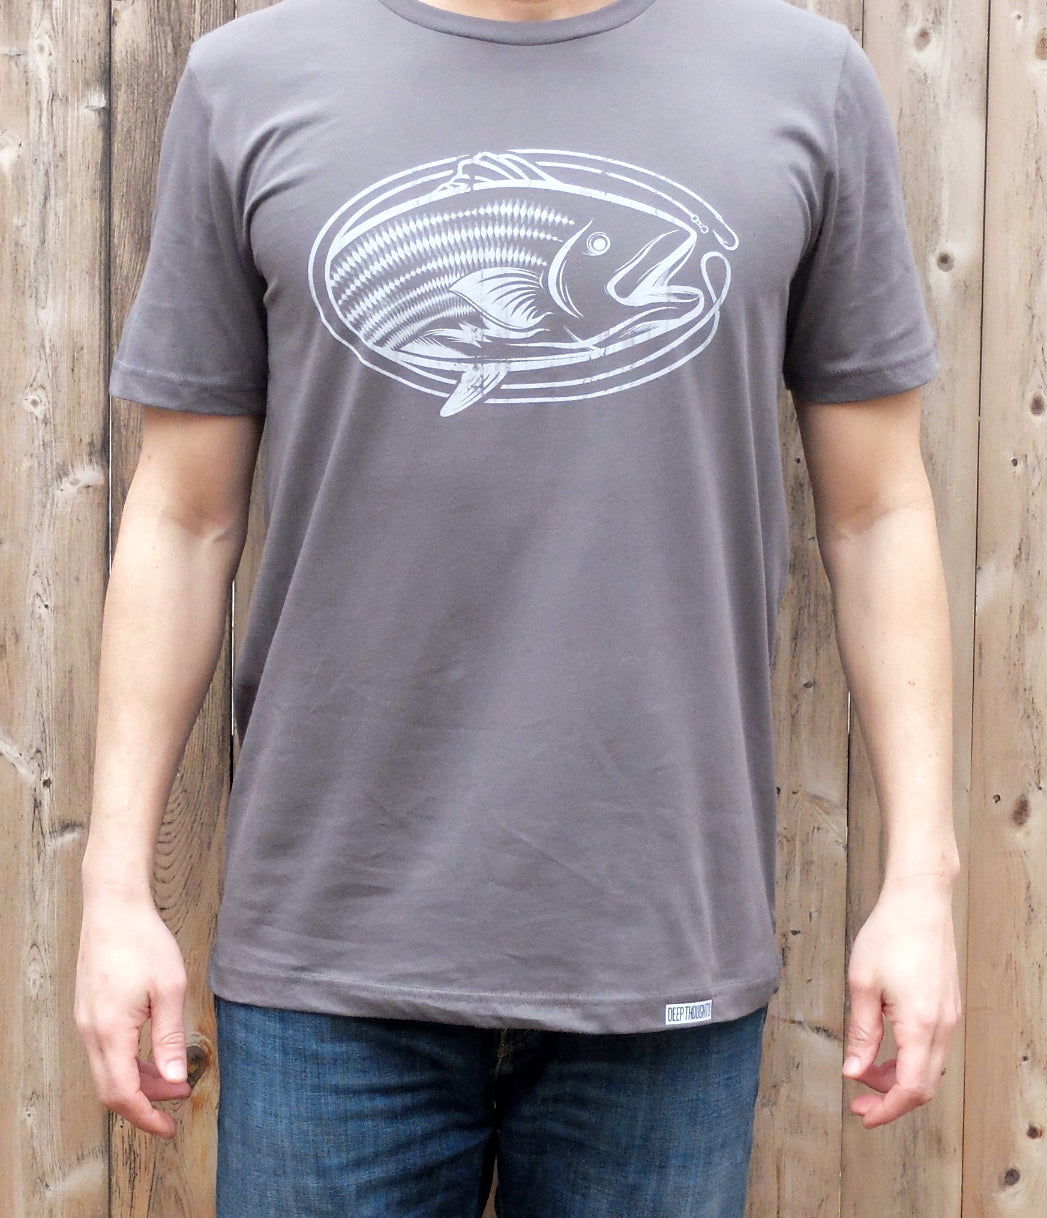 man wearing grey cotton t-shirt with white striped bass fishing graphic